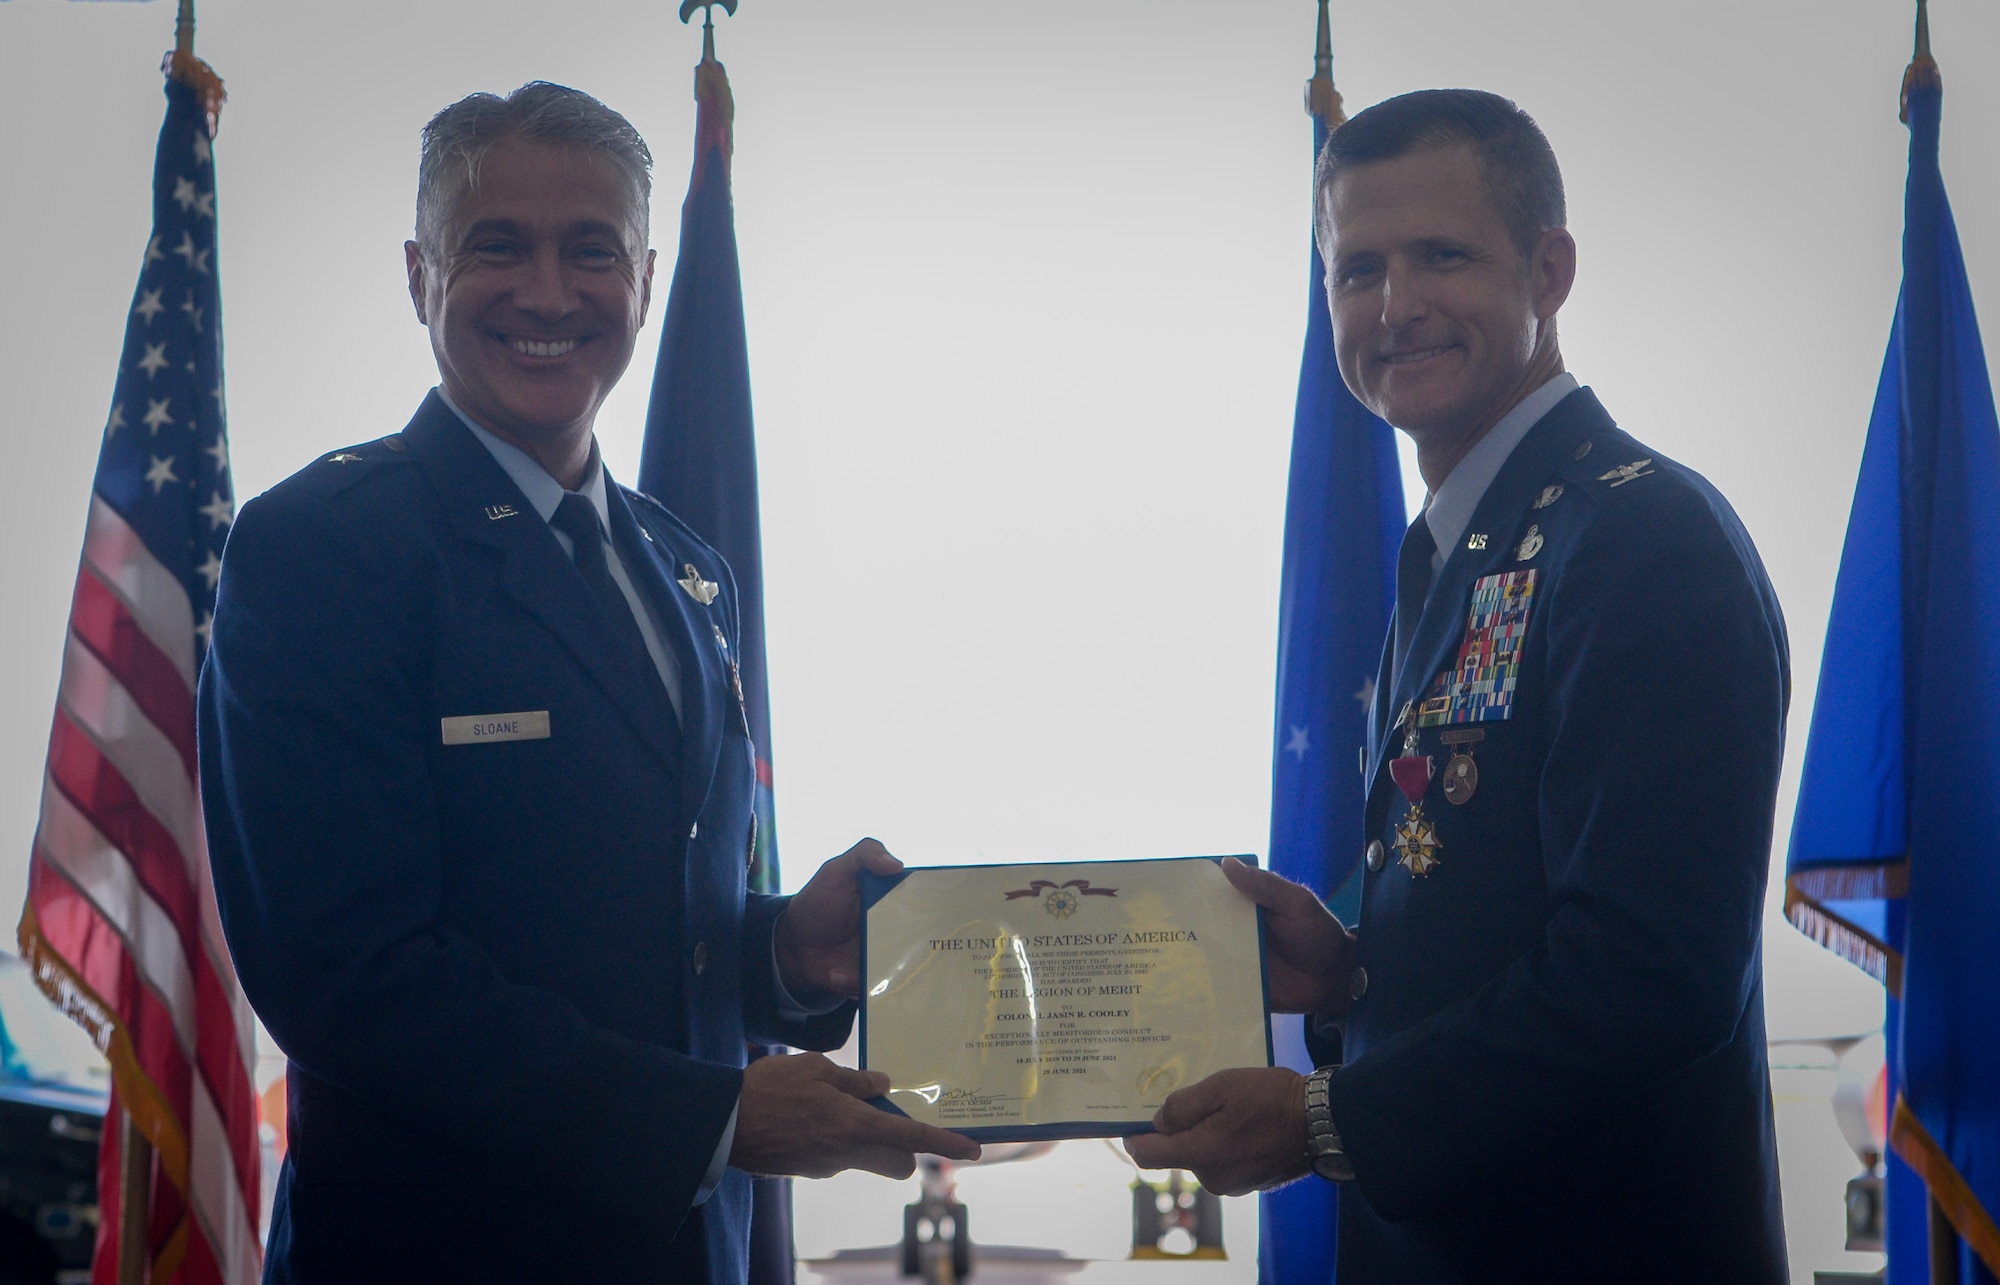 U.S. Air Force Col. Jasin Colley, 36th Mission Support Group outgoing commander, is awarded the Legion of Merit from U.S. Air Force Brig. Gen. Jeremy Sloane, 36th Wing commander, during a change of command ceremony at Andersen Air Force Base, Guam, June 29, 2021.